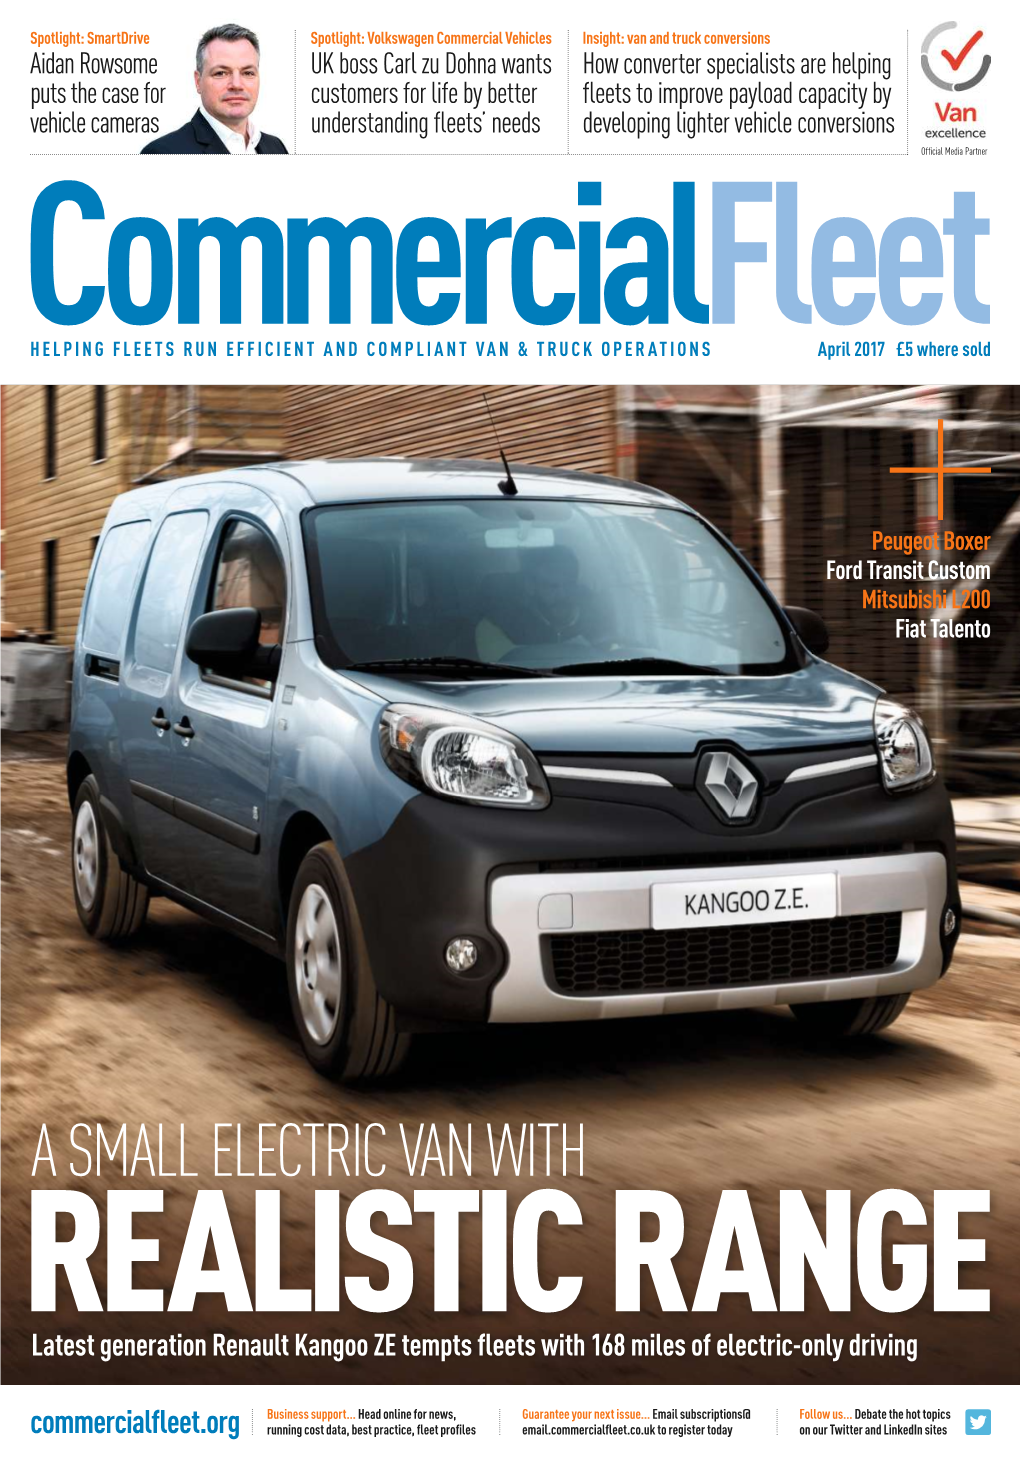 A SMALL ELECTRIC VAN with REALISTIC RANGE Latest Generation Renault Kangoo ZE Tempts Fleets with 168 Miles of Electric-Only Driving